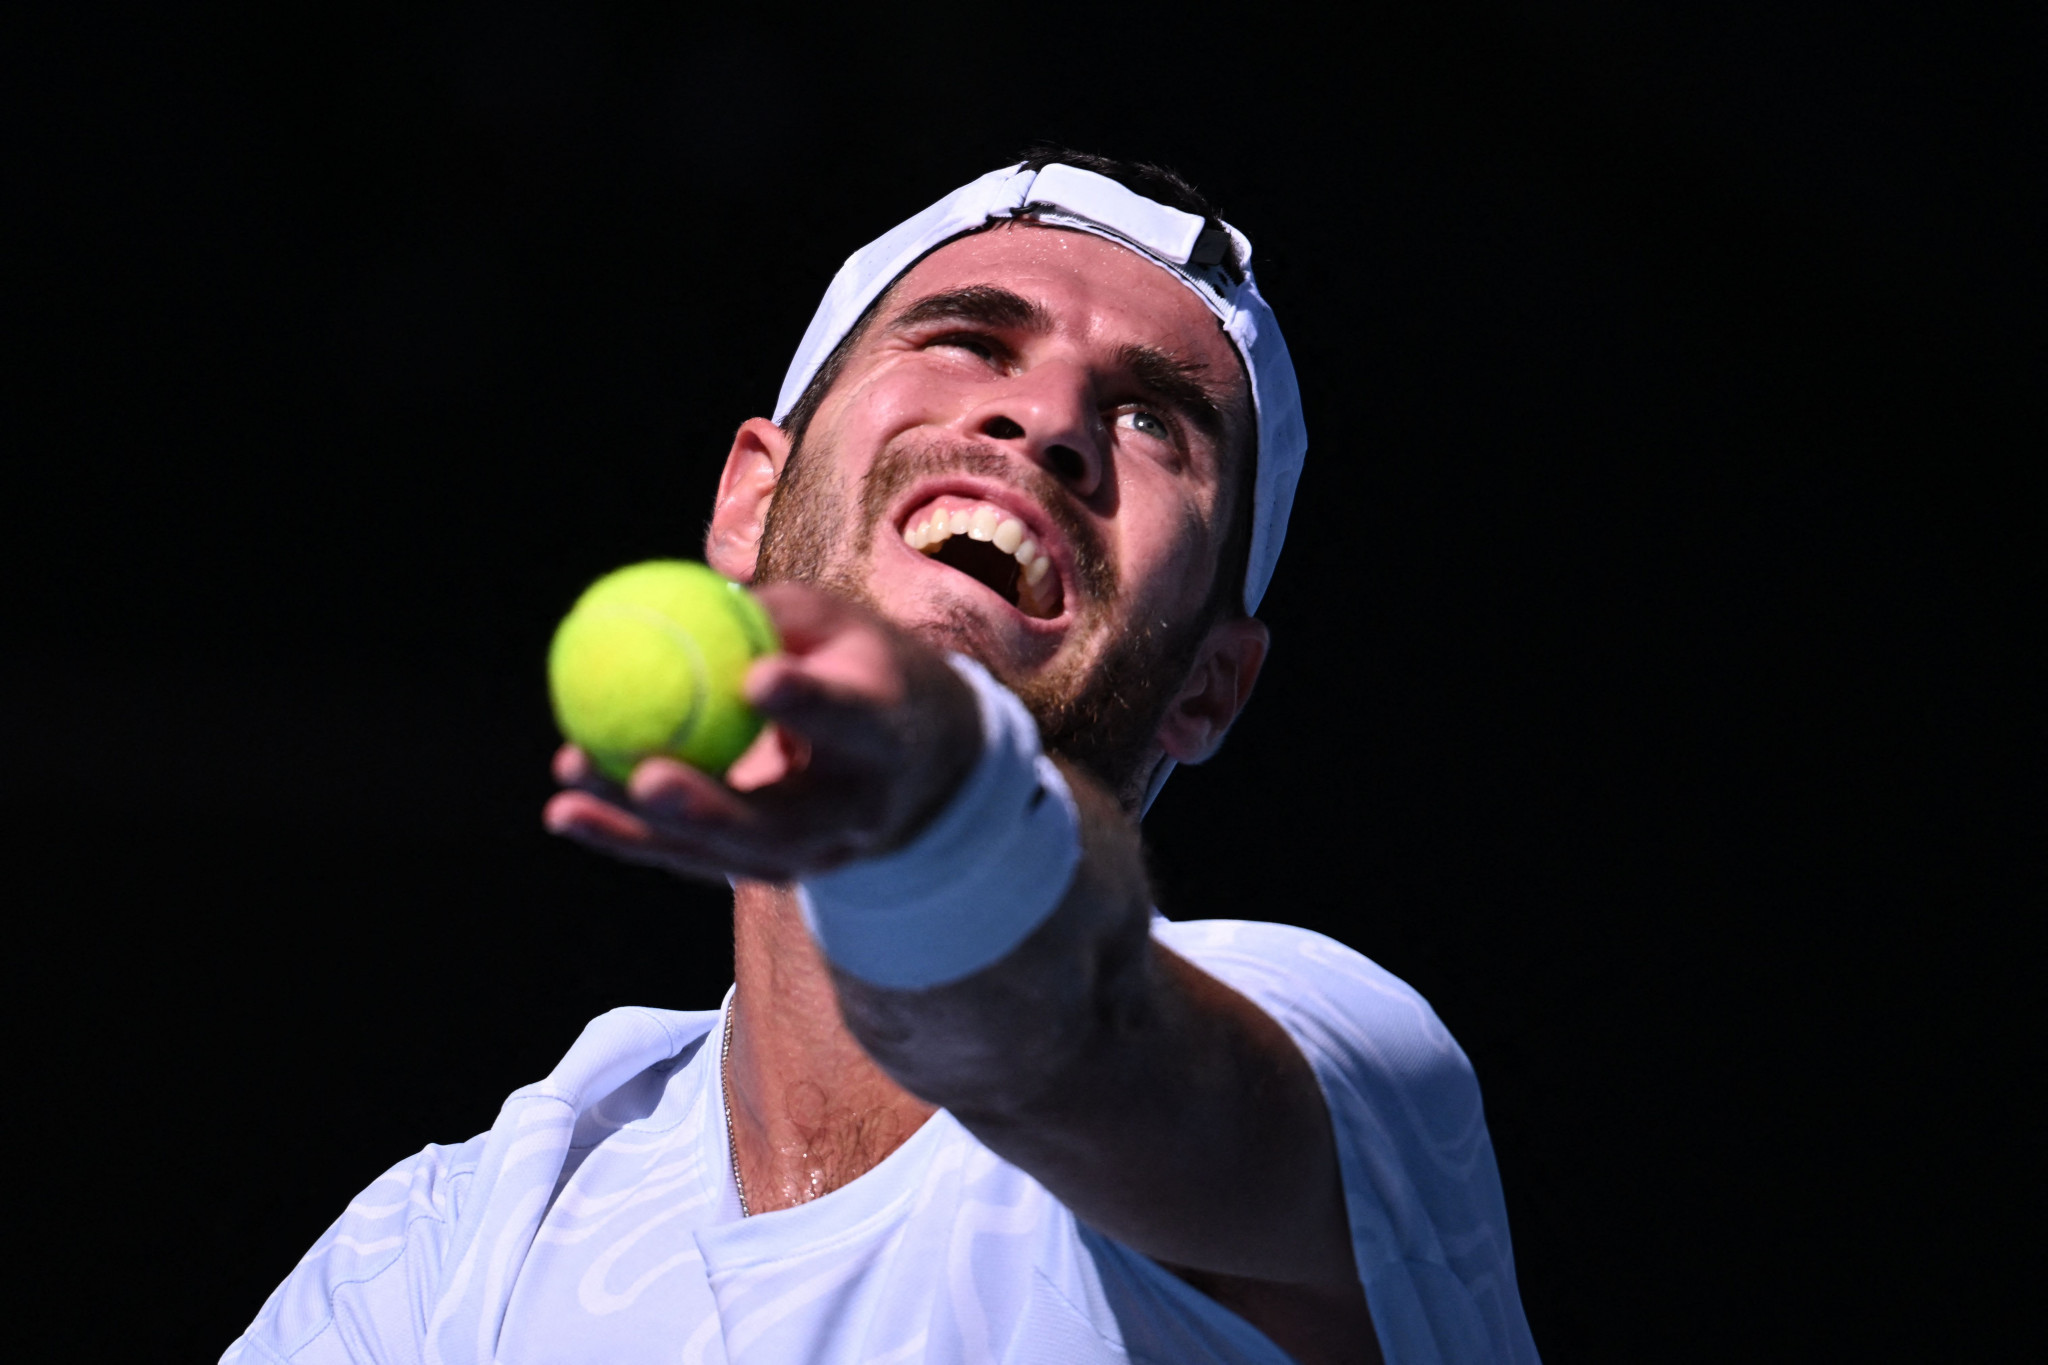 Olympic silver medallist Karen Khachanov, a Russian player competing as a neutral, is into the quarter-finals with a straight-sets win against Japan's Yoshihito Nishioka ©Getty Images